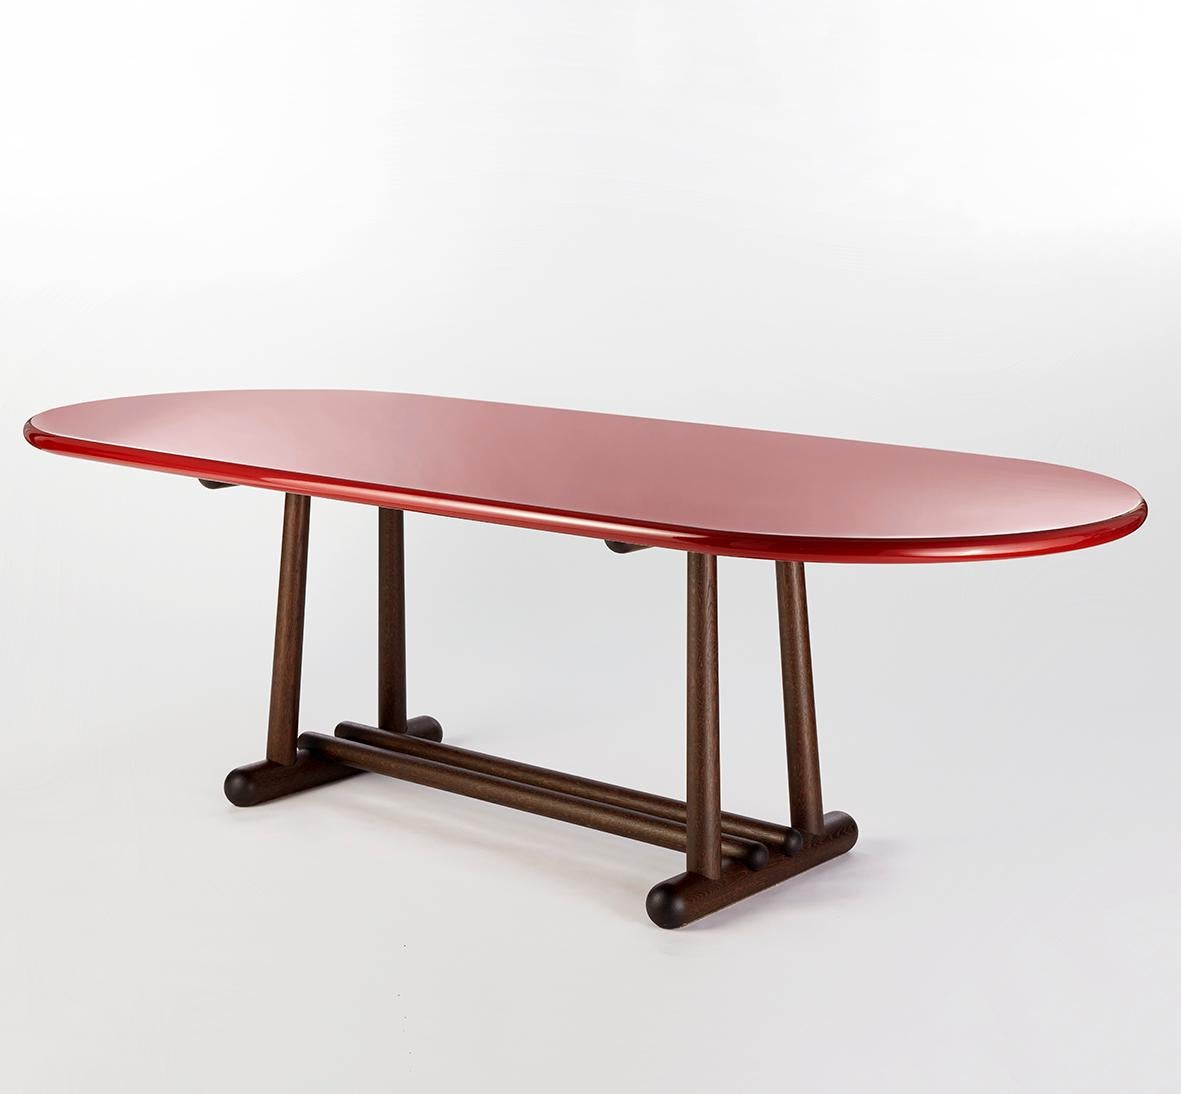 Belenus dining table by Gisbert Pöppler
Dimensions: D 240 x W 101 x H 73 cm
Materials: High gloss lacquered wood, smoked oak
La Luna extension side table also available.

The Belenus table stands on solid rounded legs and connecting oval shaped feet